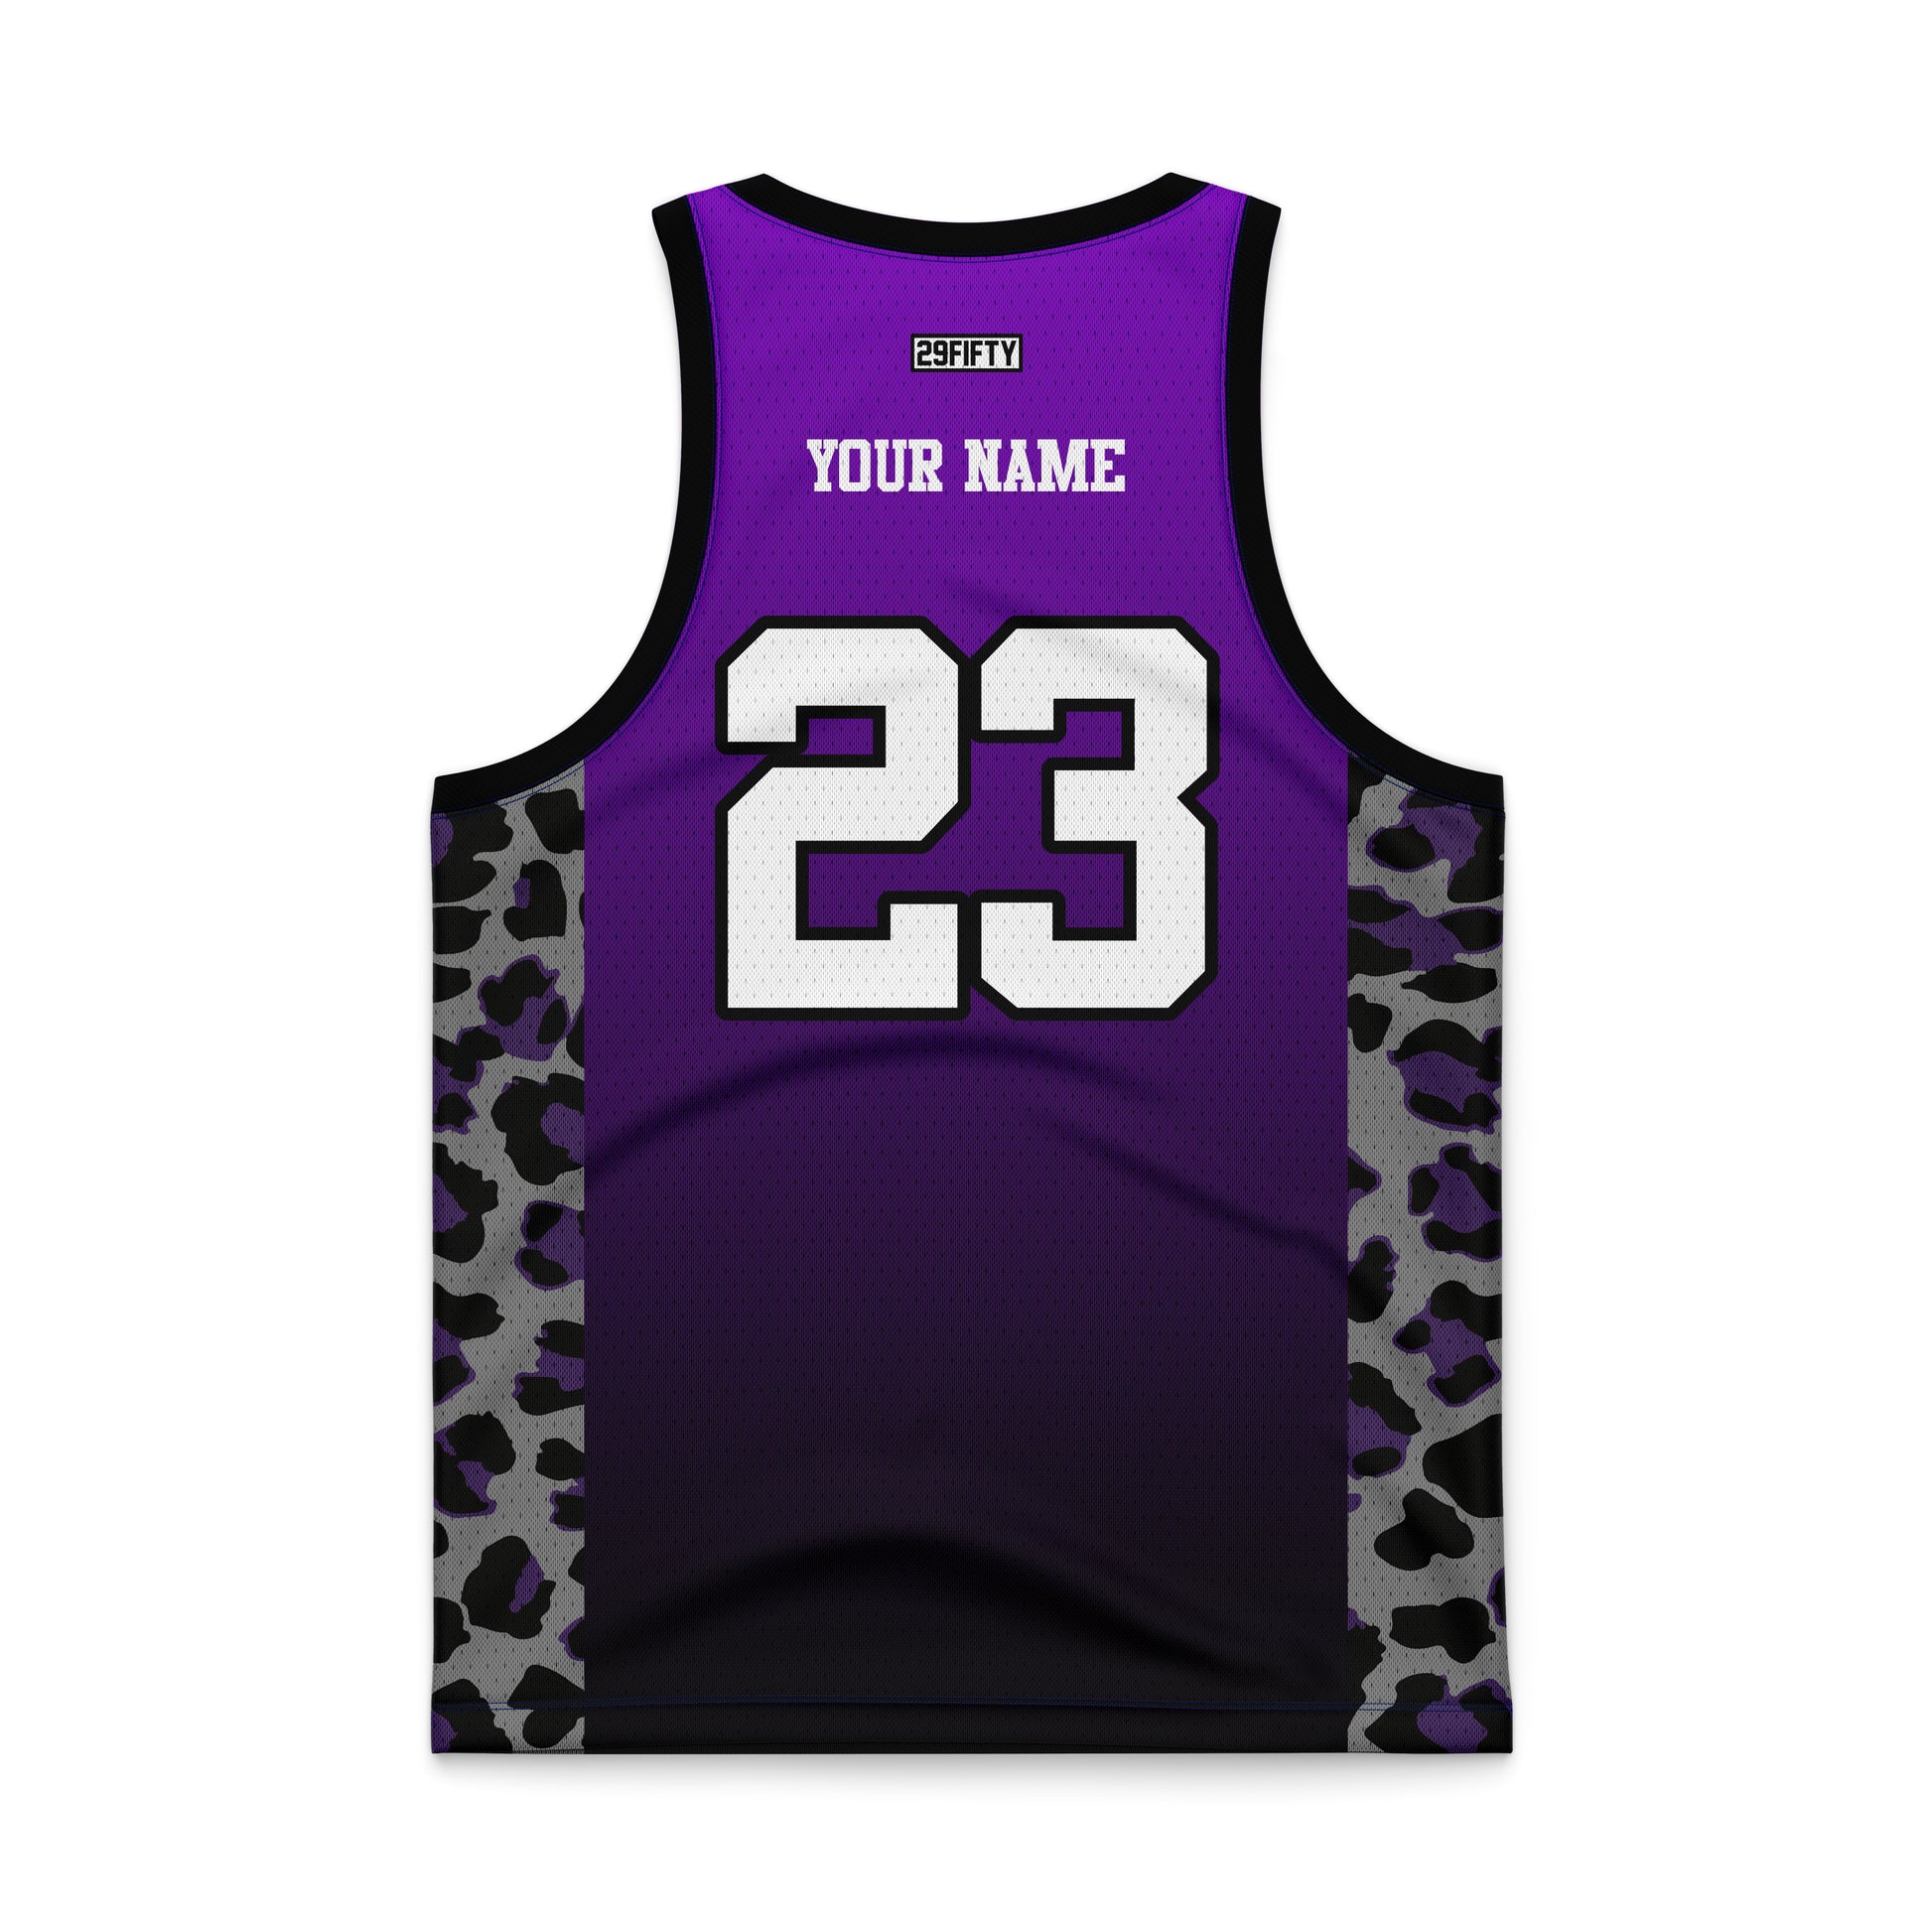 Team Pack Elite G.O.A.T., Sublimated Basketball Uniforms